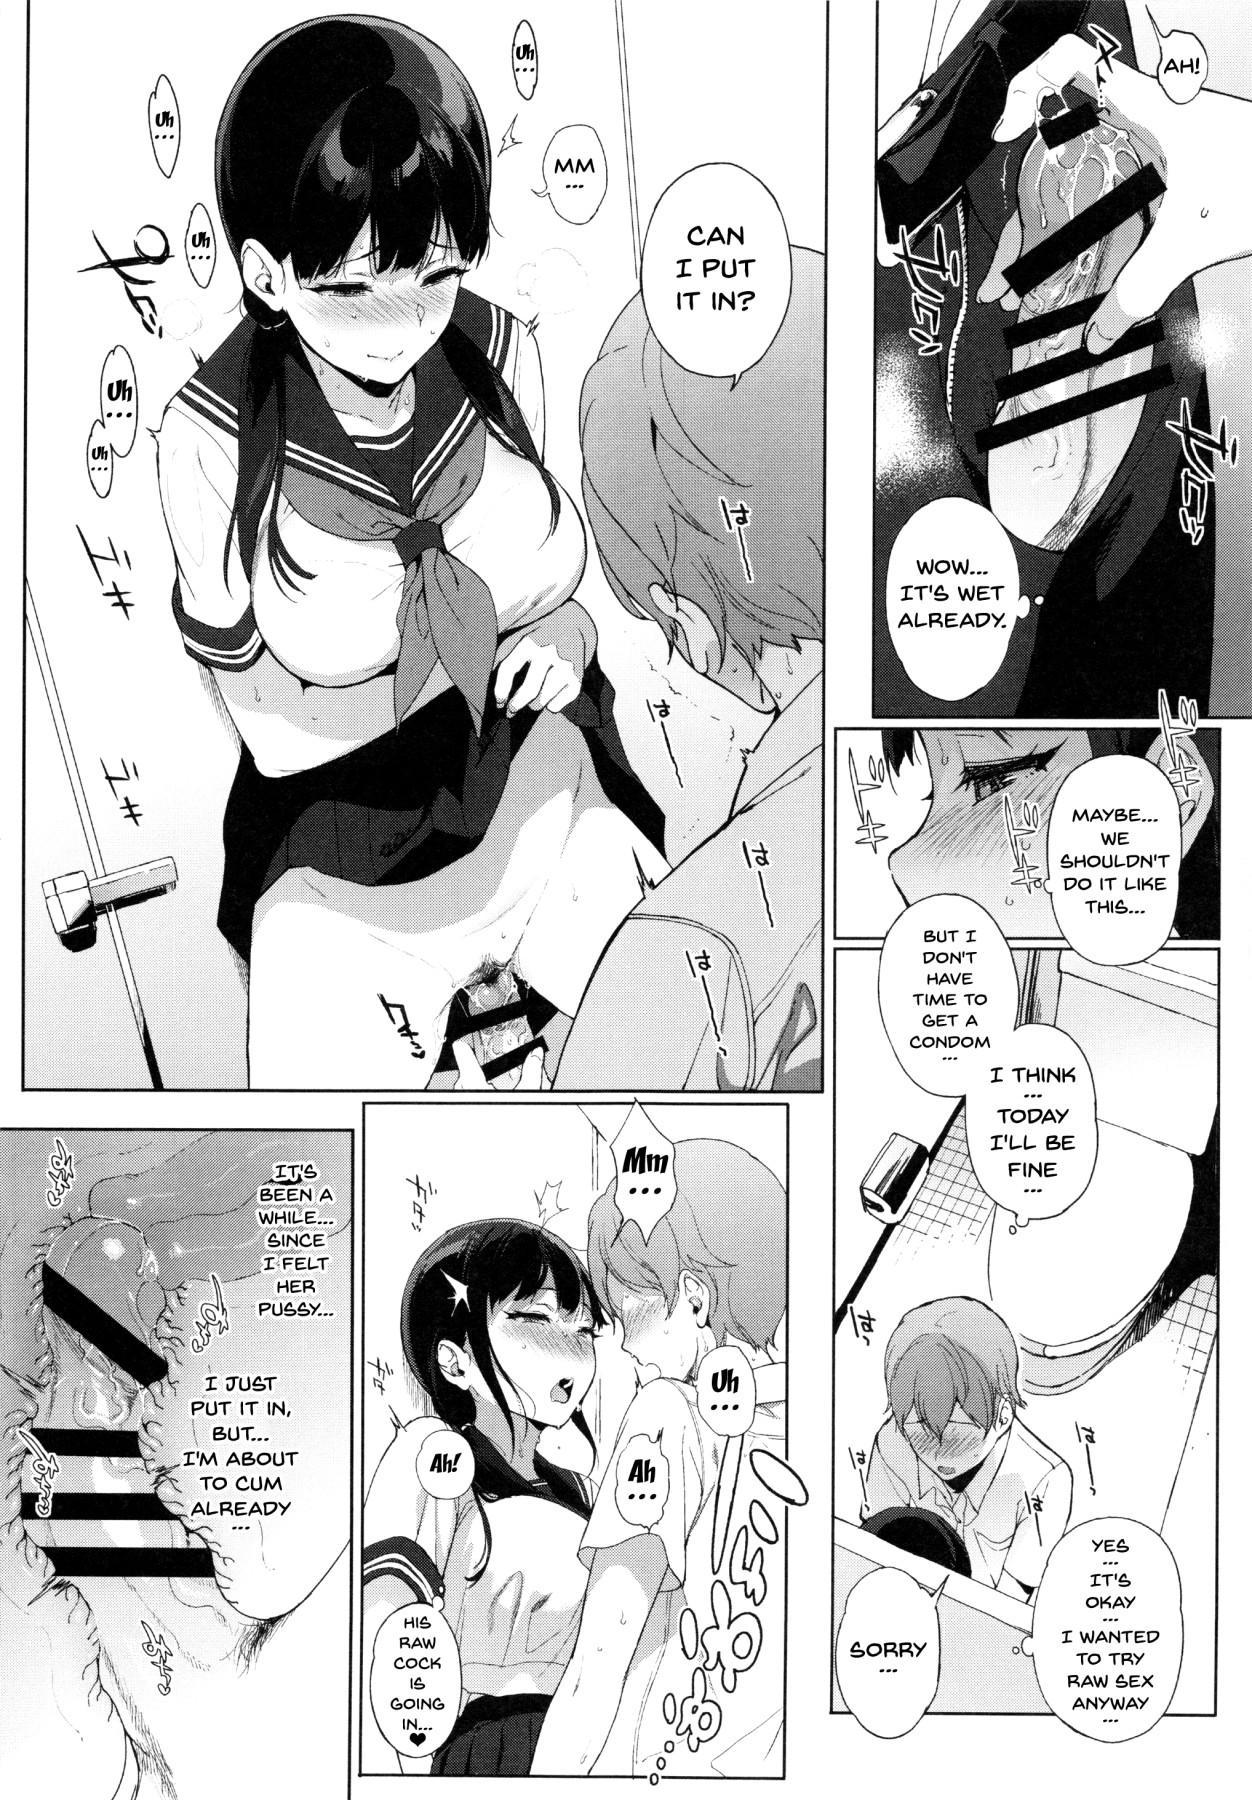 Anal Play Succubus Stayed Life 6 Pack - Page 6